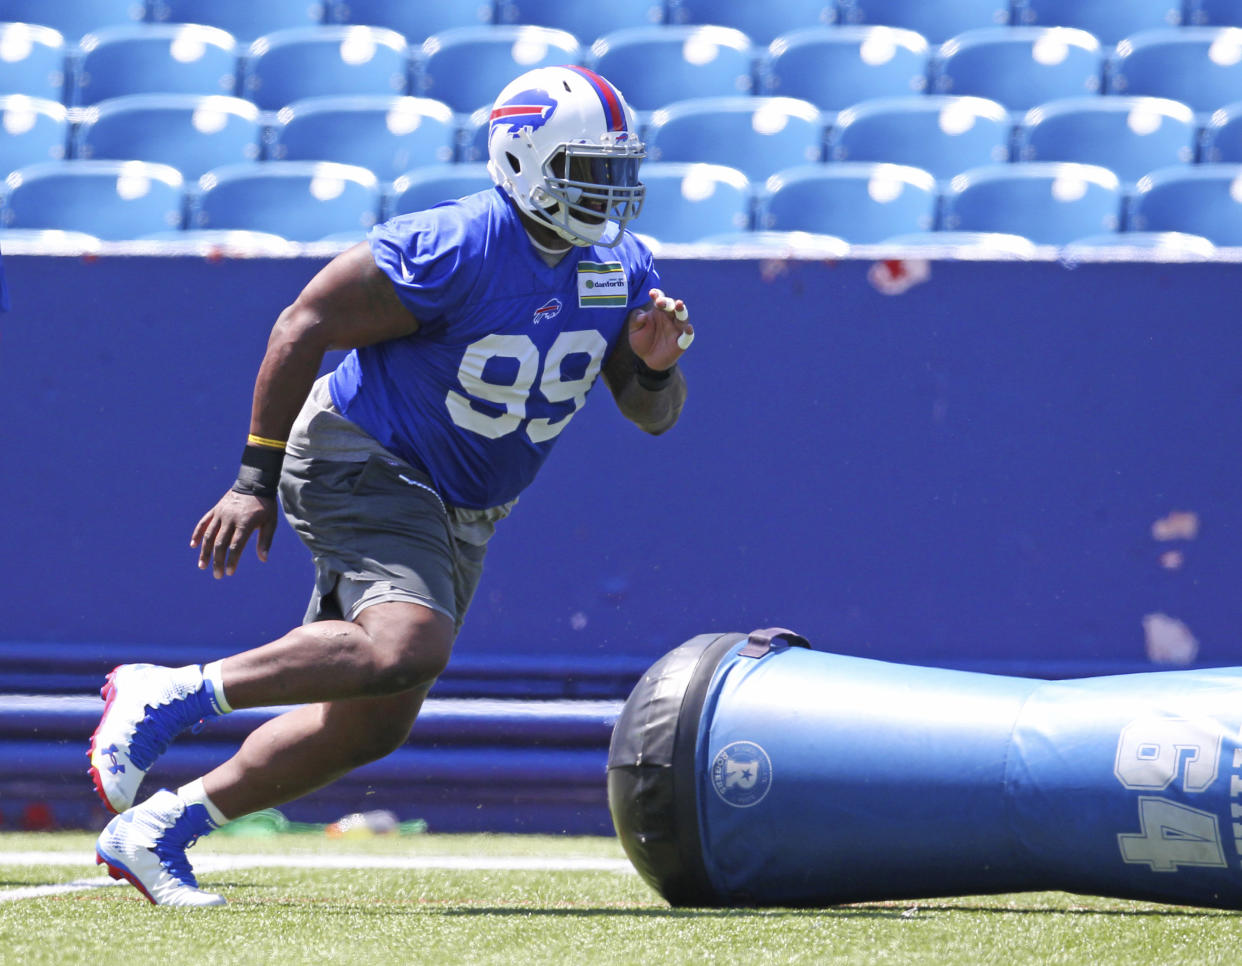 Marcell Dareus was sent home from Saturday's preseason game for violating a team rule. (AP)